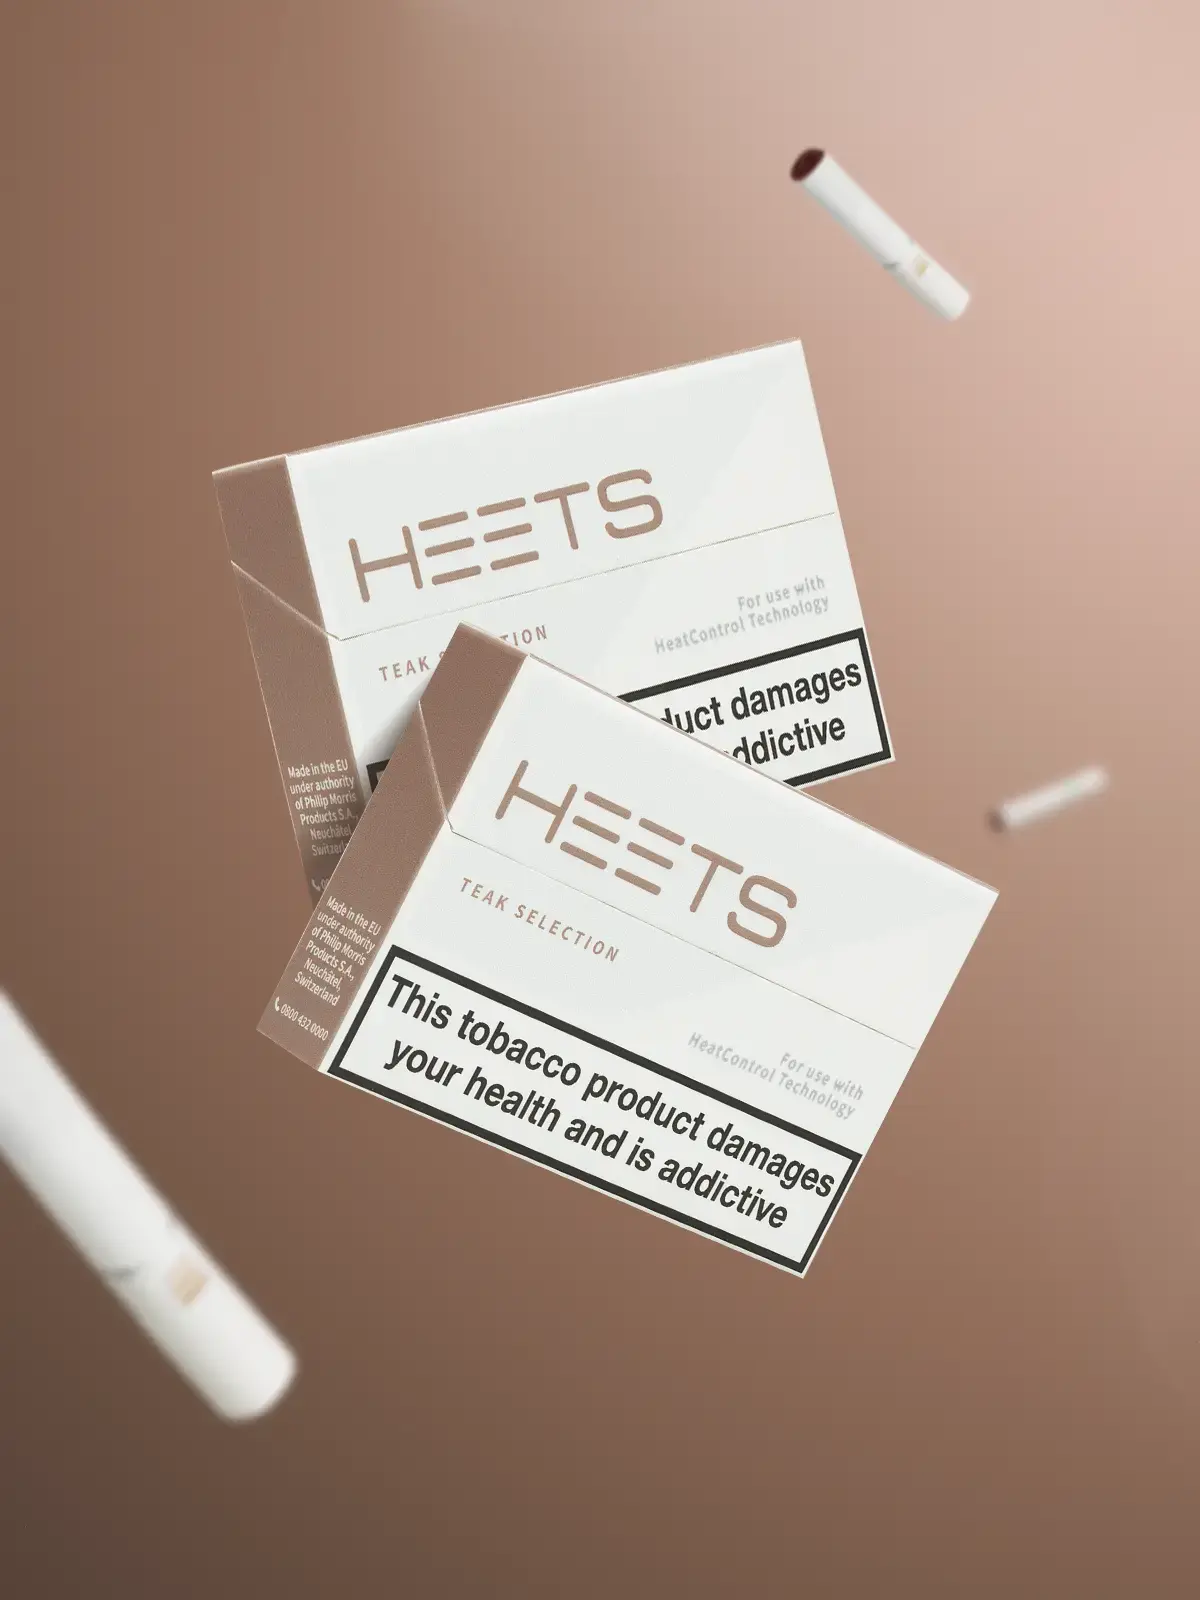 Two packs of IQOS HEETS in Teak flavour floating in front of a light brown background